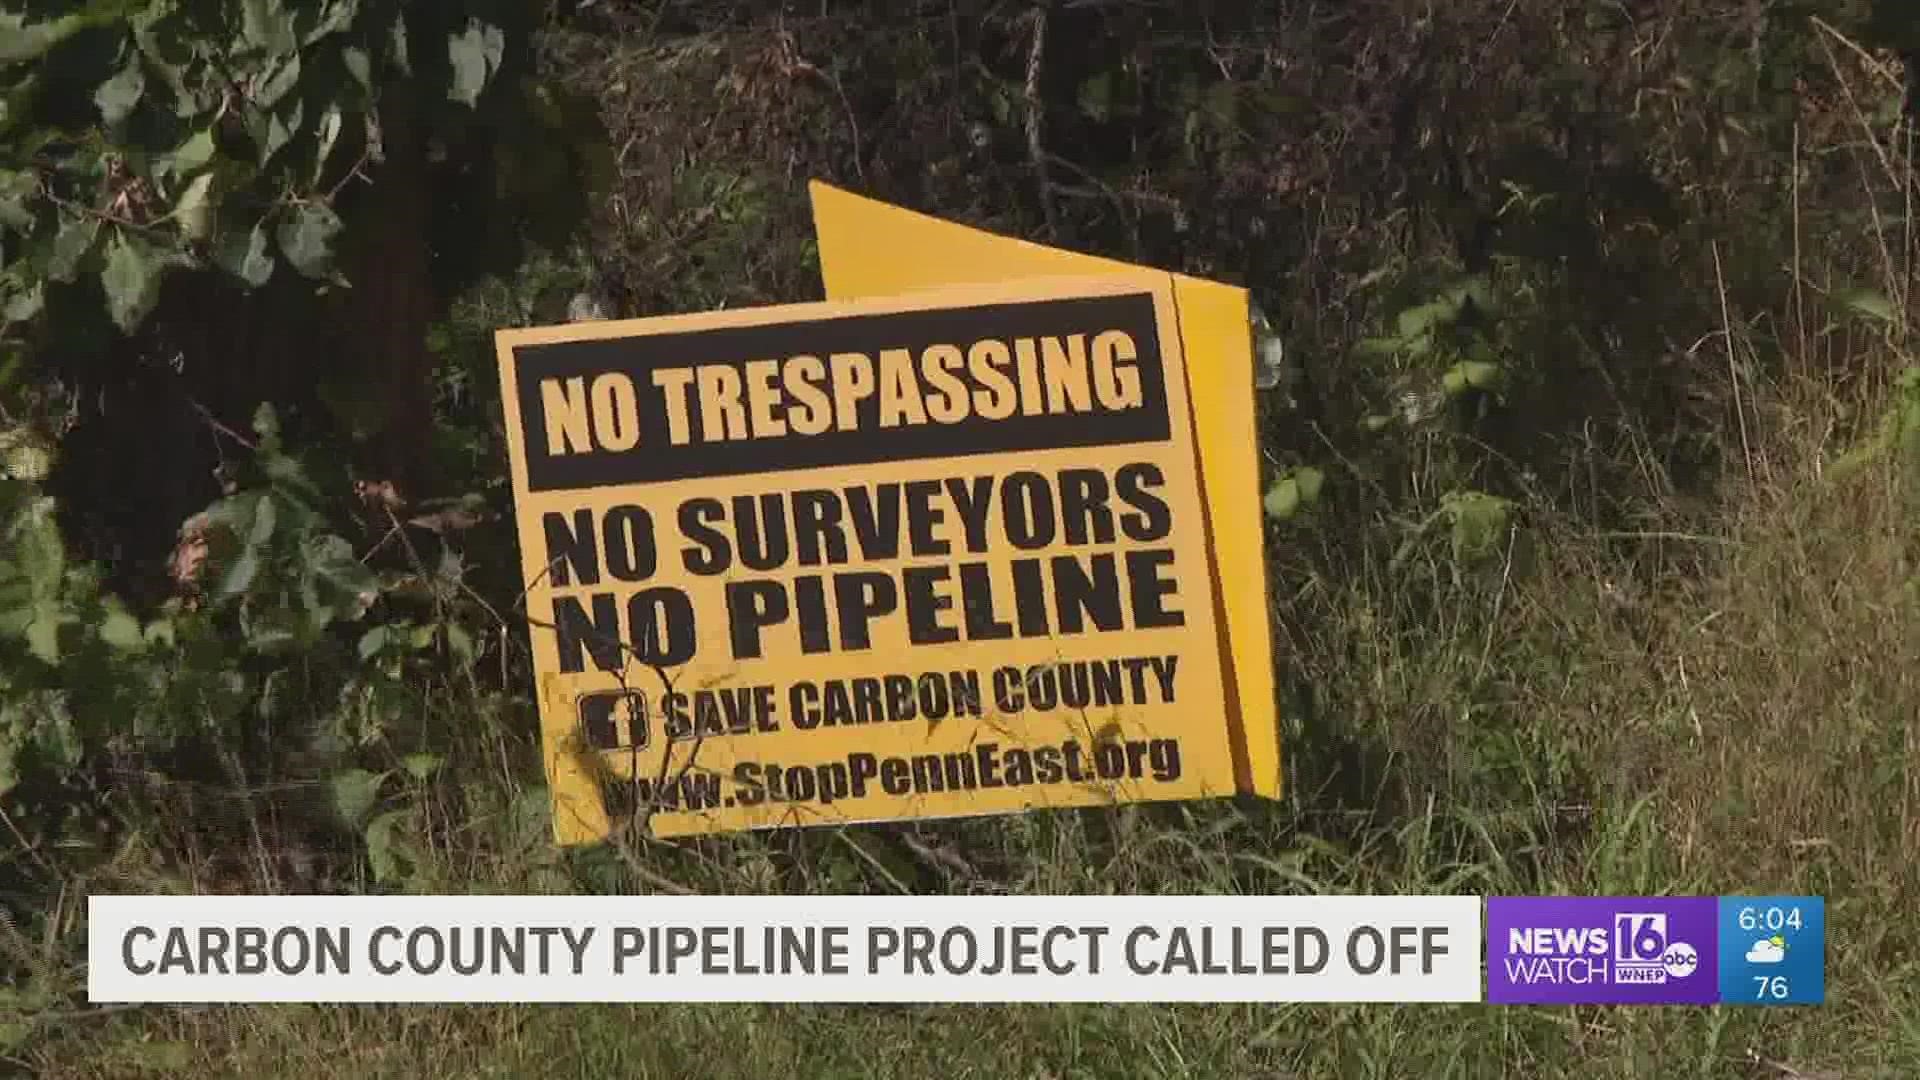 Plans for a proposed natural gas pipeline running through parts of Carbon County and the Lehigh Valley are off.